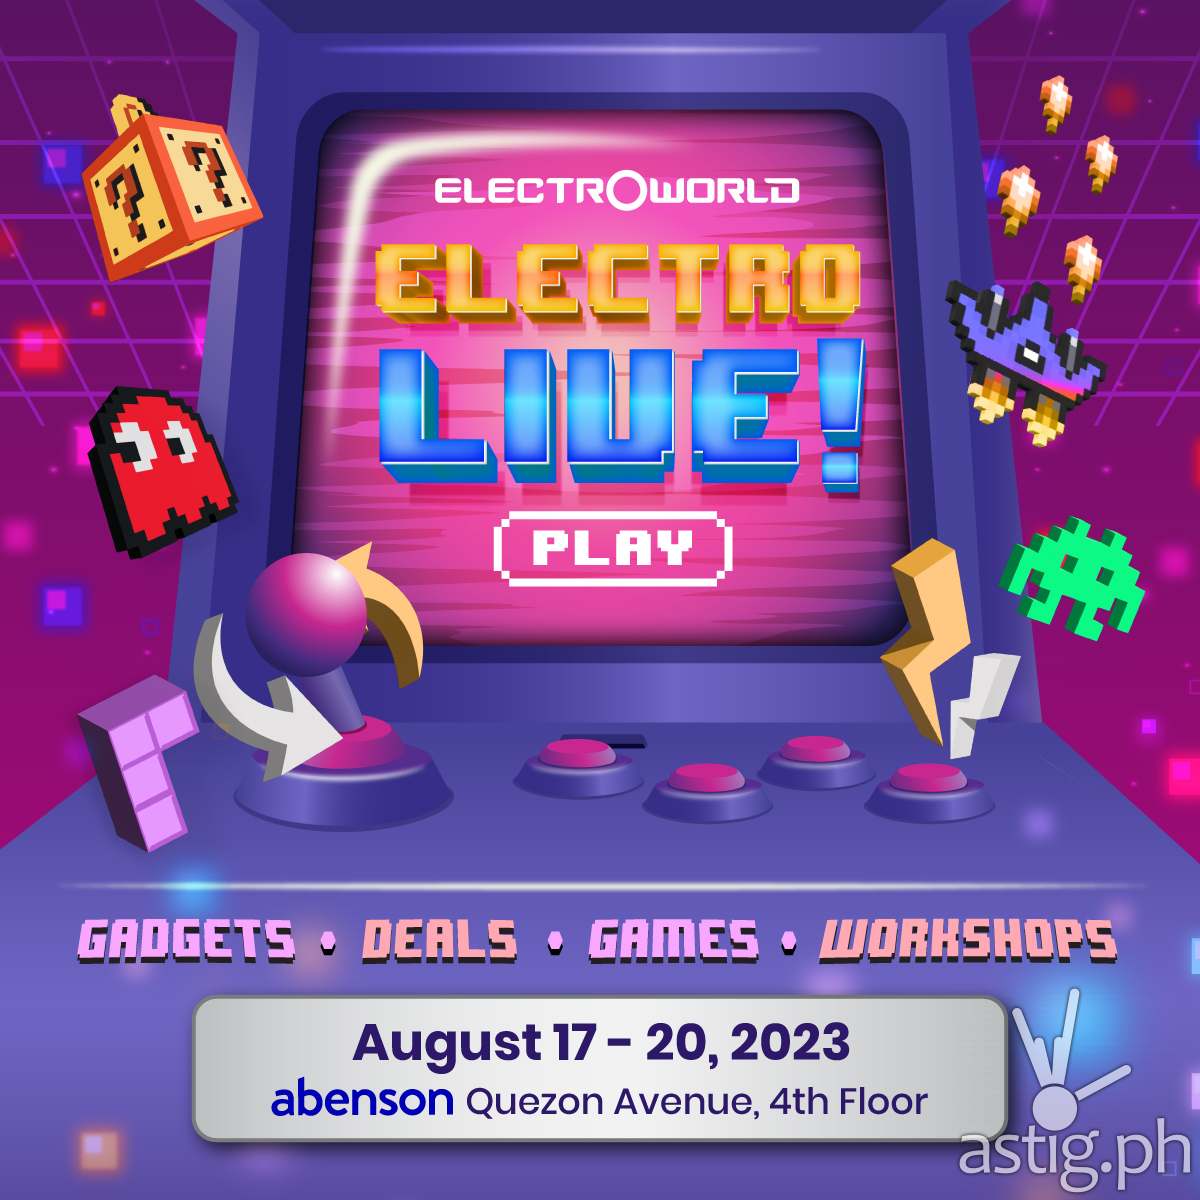 Electroworld Electro Live: Workshops, games, content creation, and more [event]